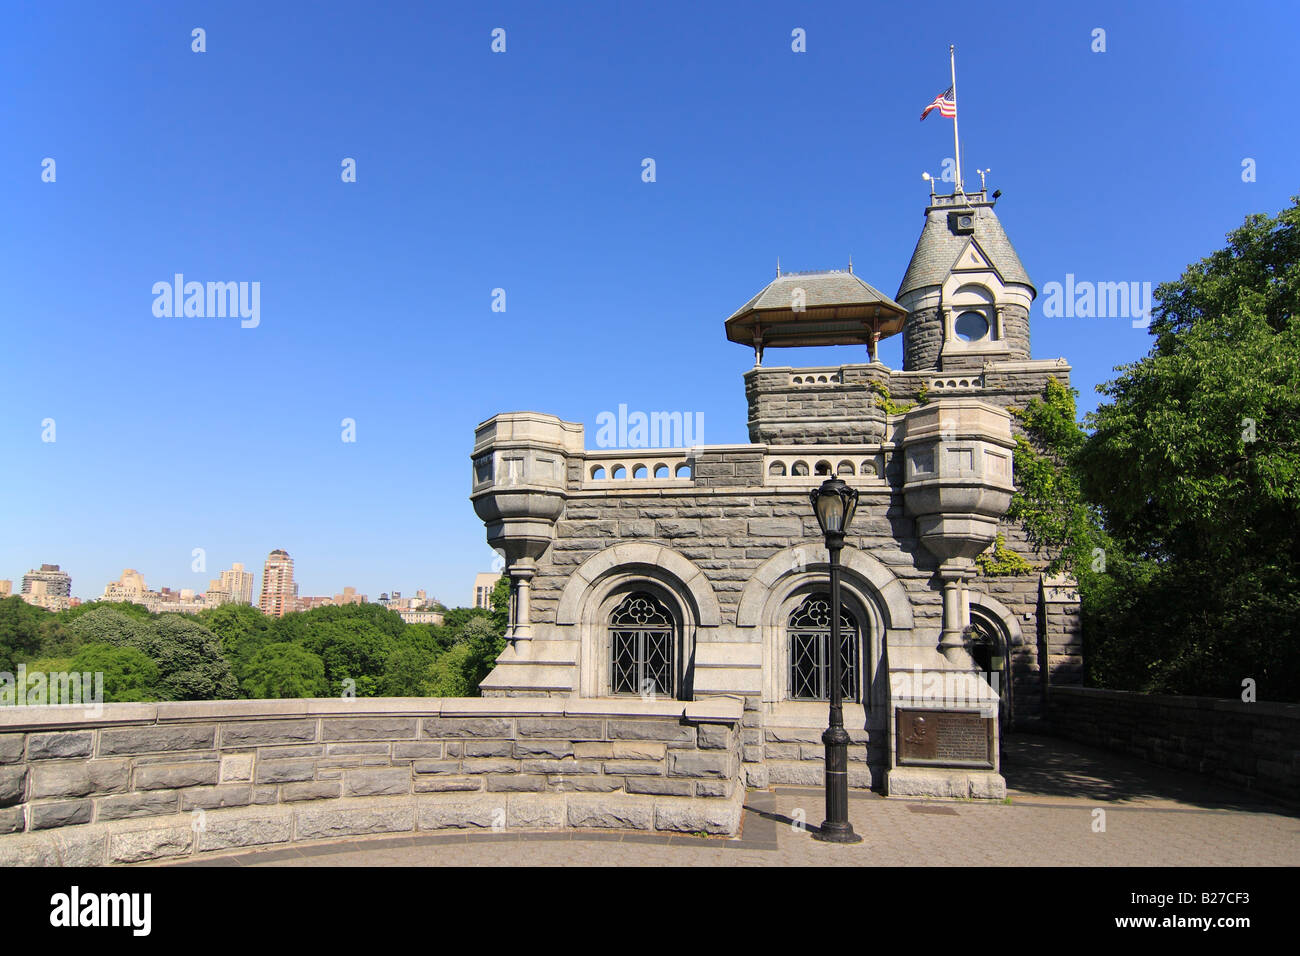 Belvedere Castle in Central Park - New York City, USA Stock Photo